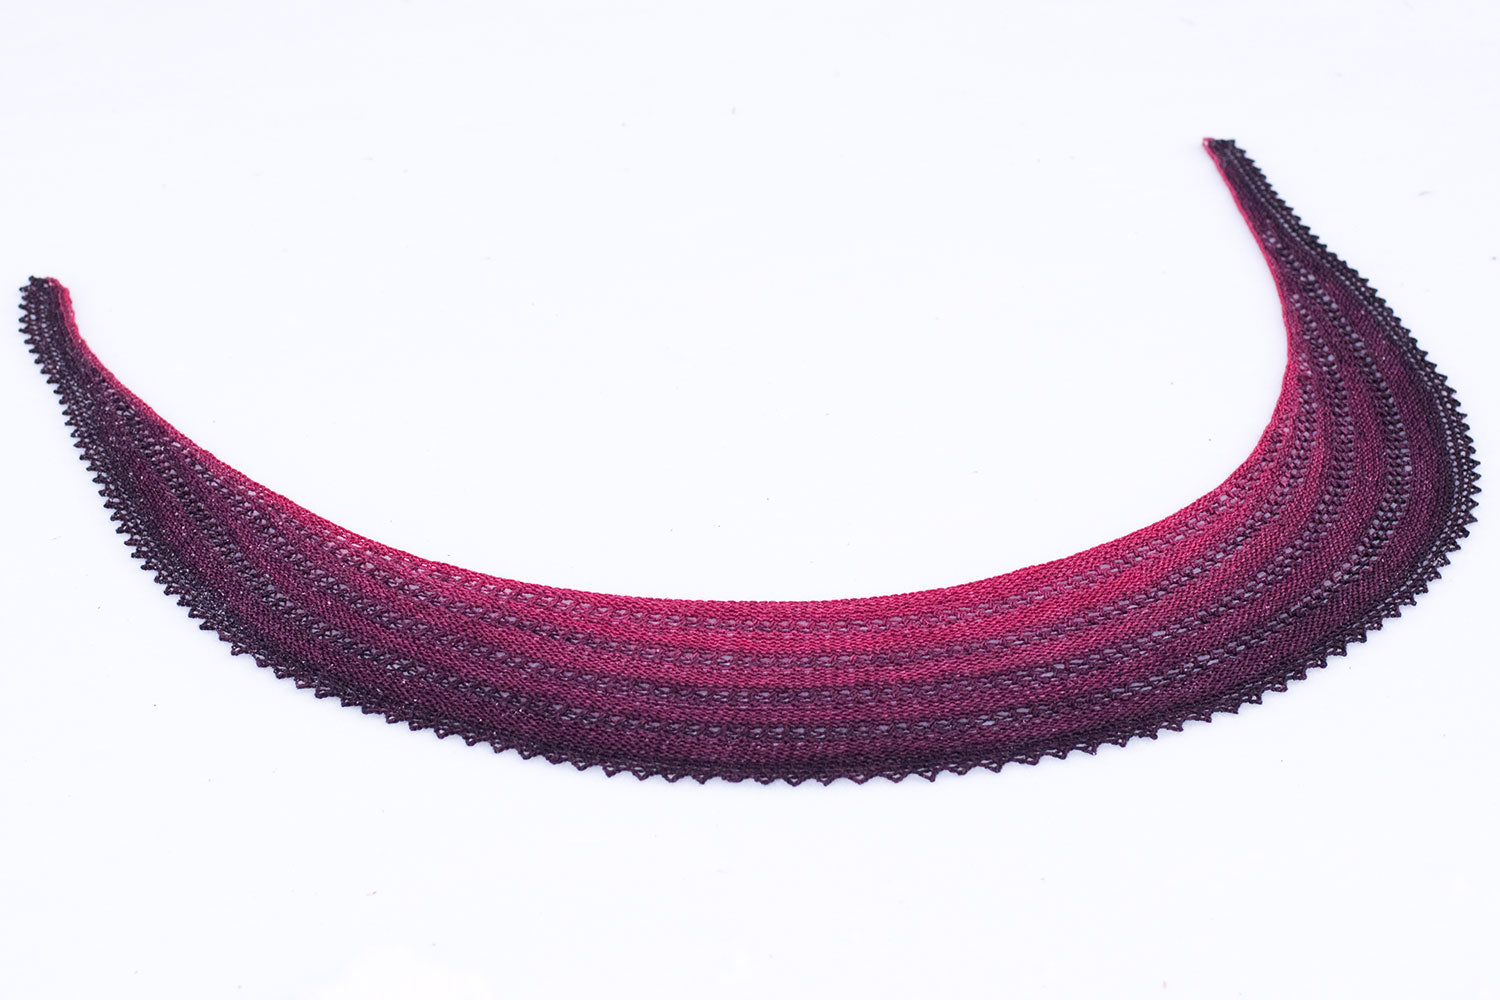 Crescent shaped shawlette pattern knit using short-rows